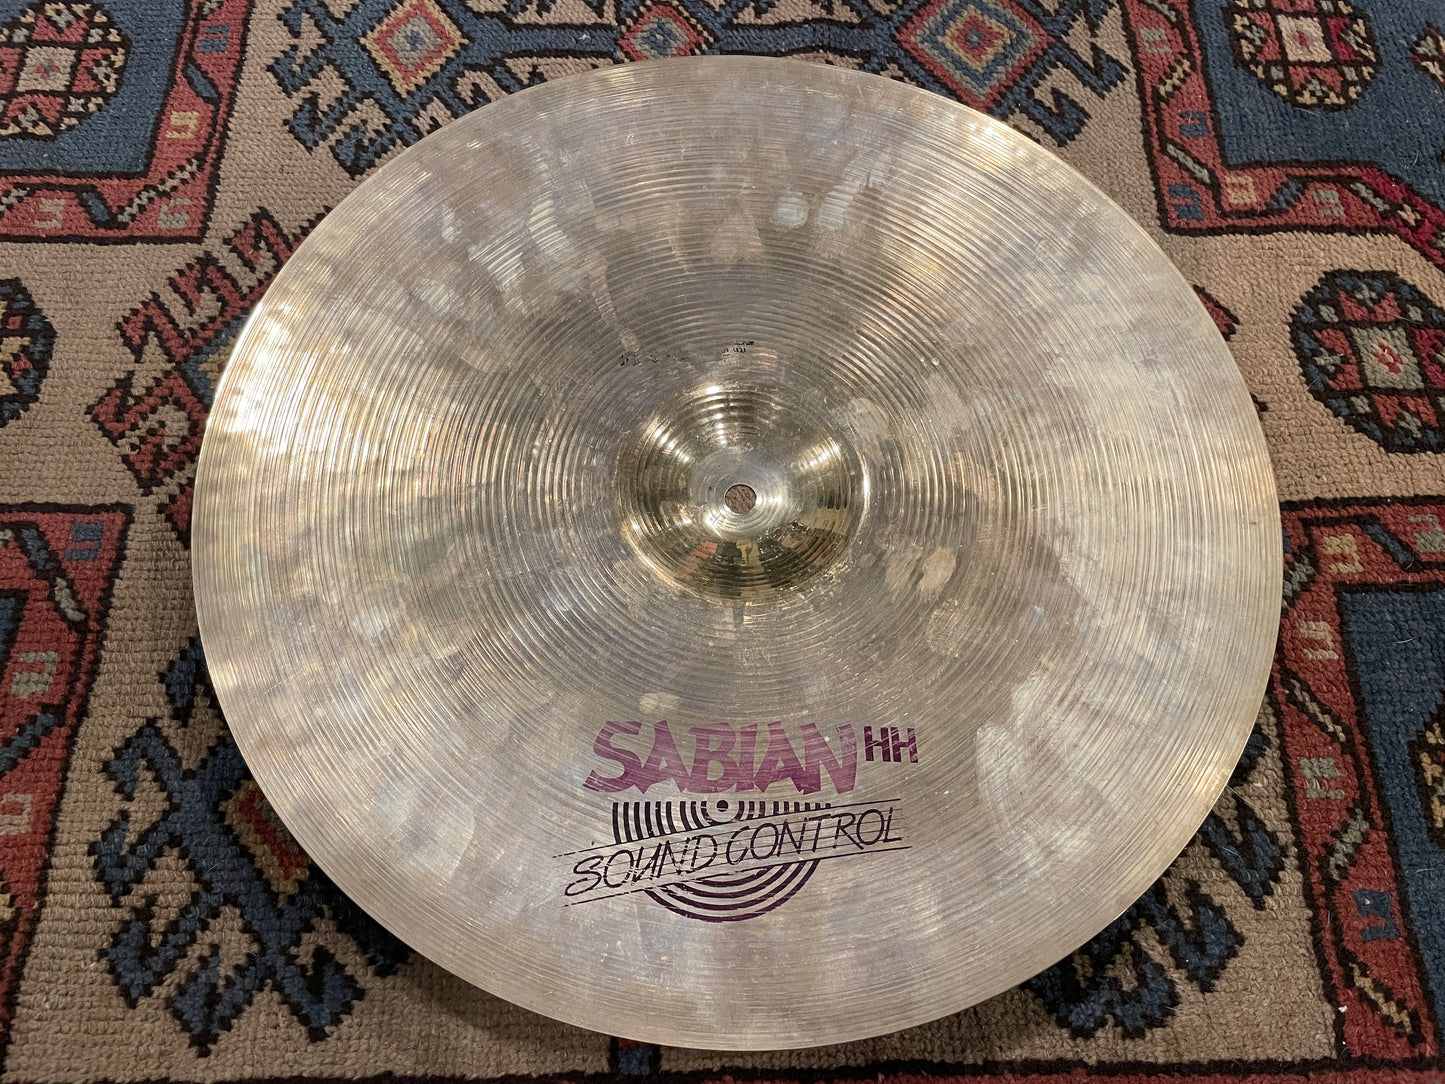 16" Sabian HH Sound Control Hand Hammered Crash Cymbal Red Label 966g *Video Demo*